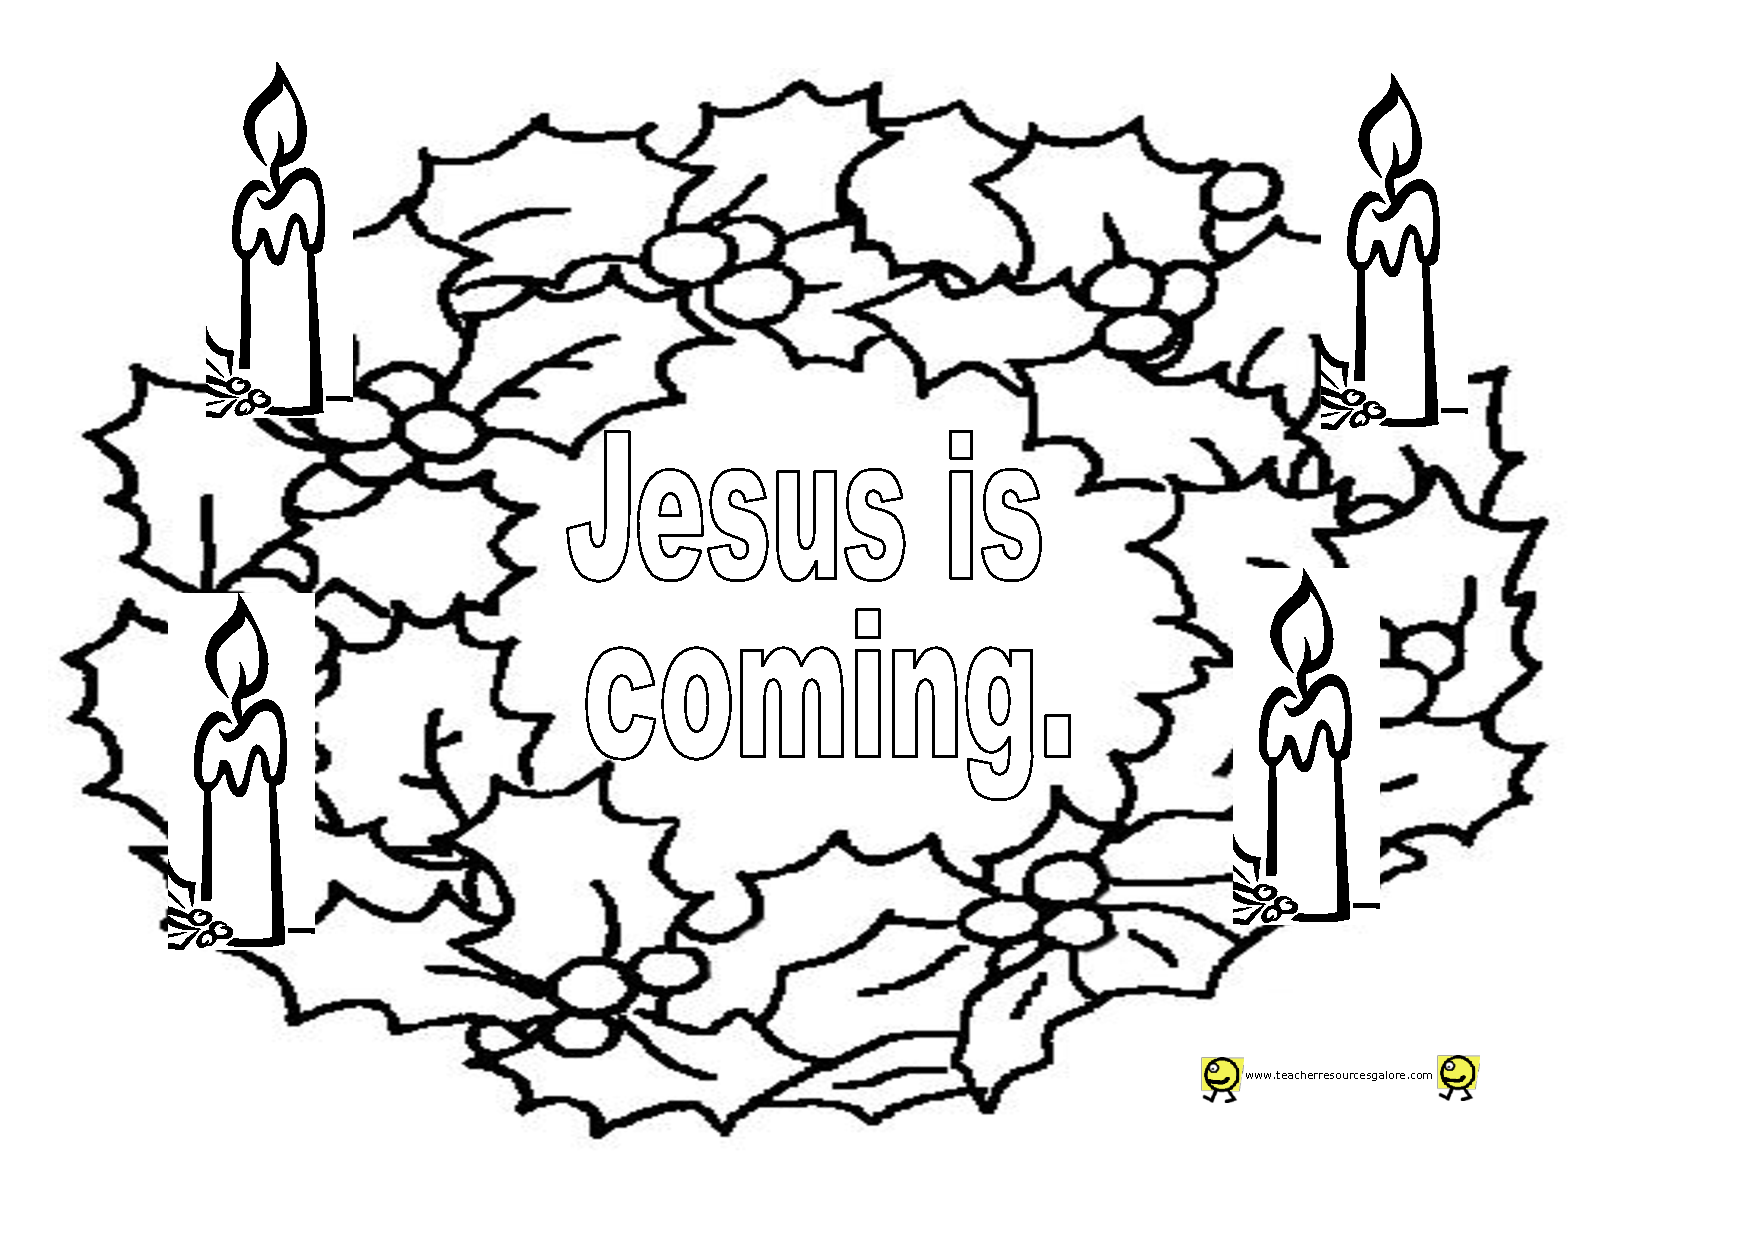 advent hope clipart black and white - Clip Art Library